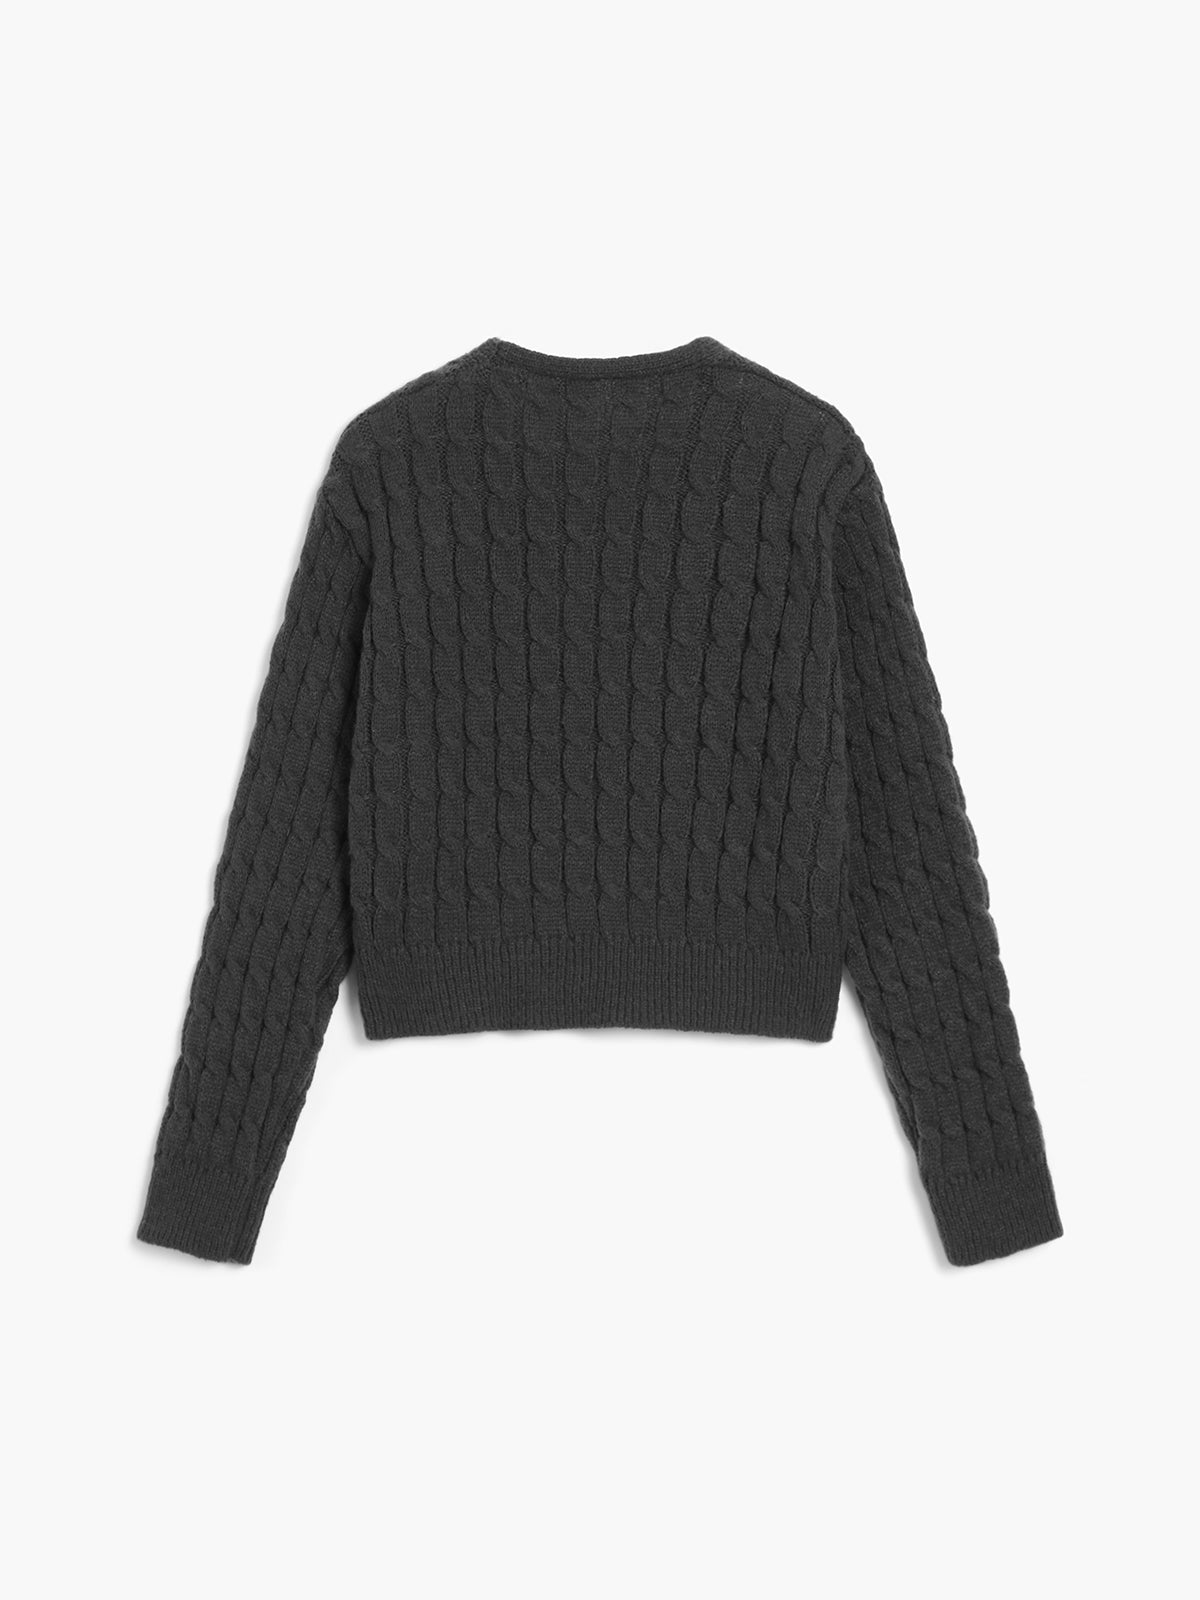 Asymmertic Buttoned Cable Knit Crop Sweater